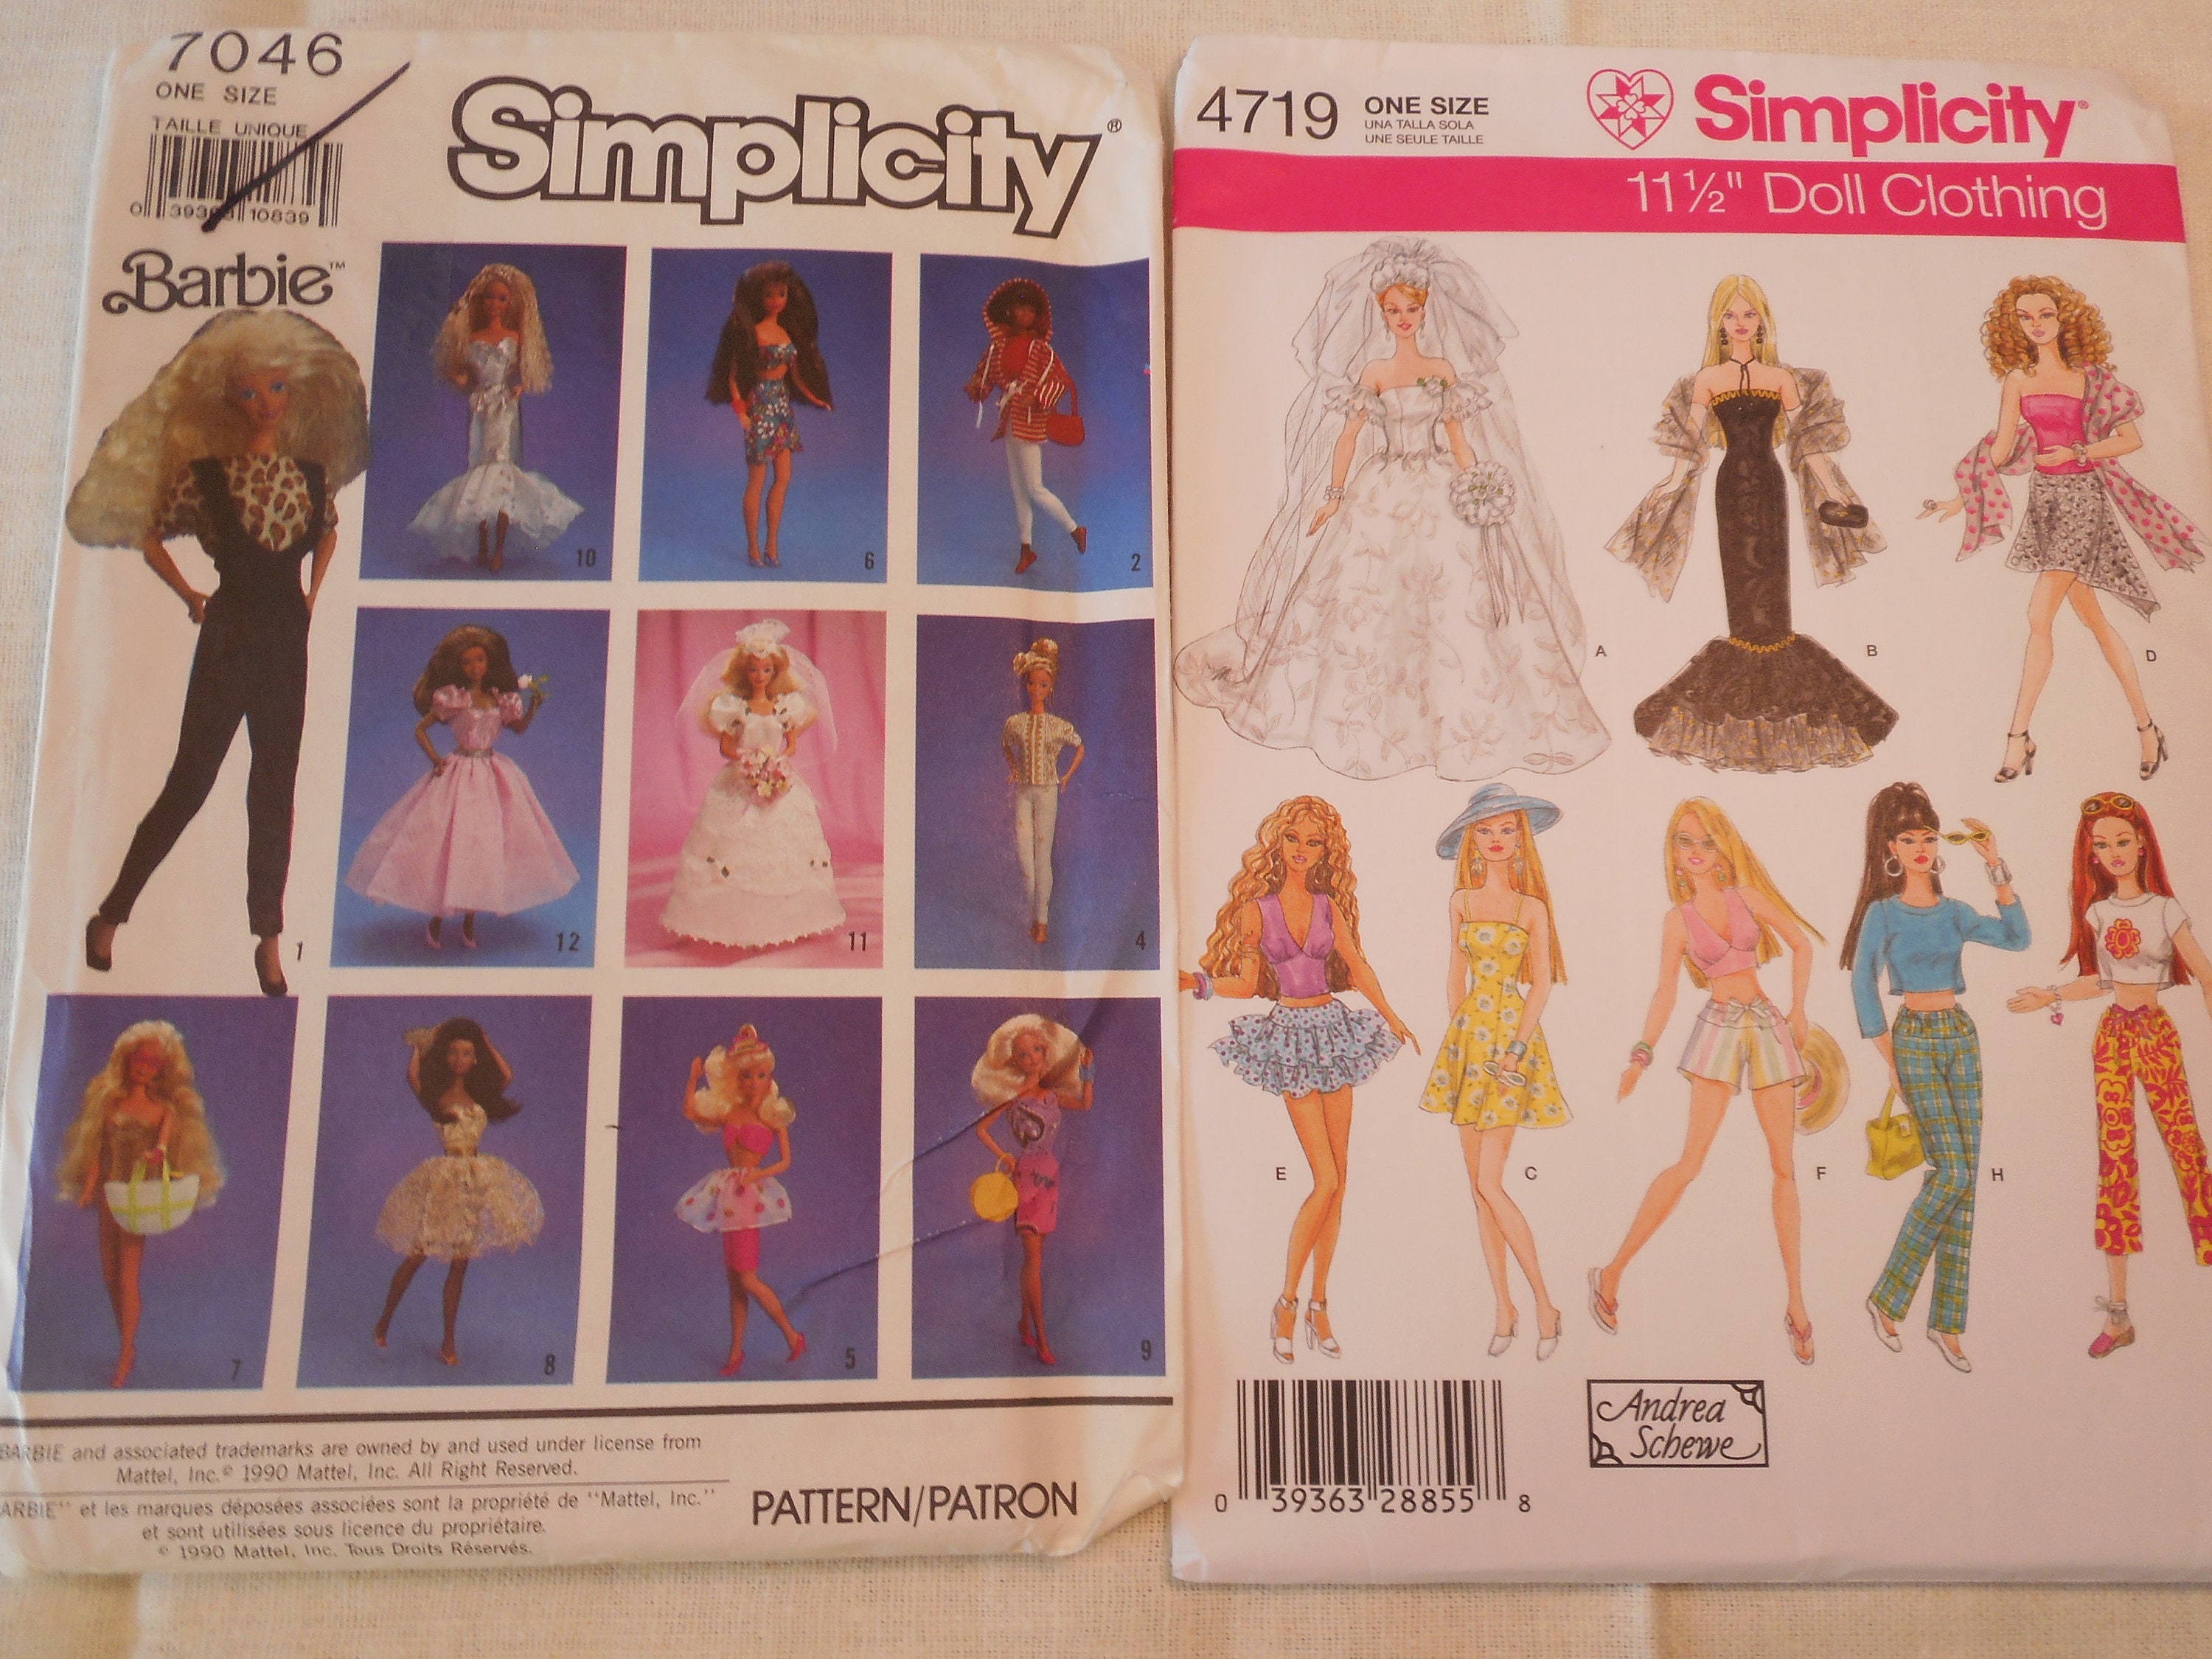 Fashion Doll Wardrobes and gowns For 11.5 inch Dolls like Barbie Your choice of new patterns